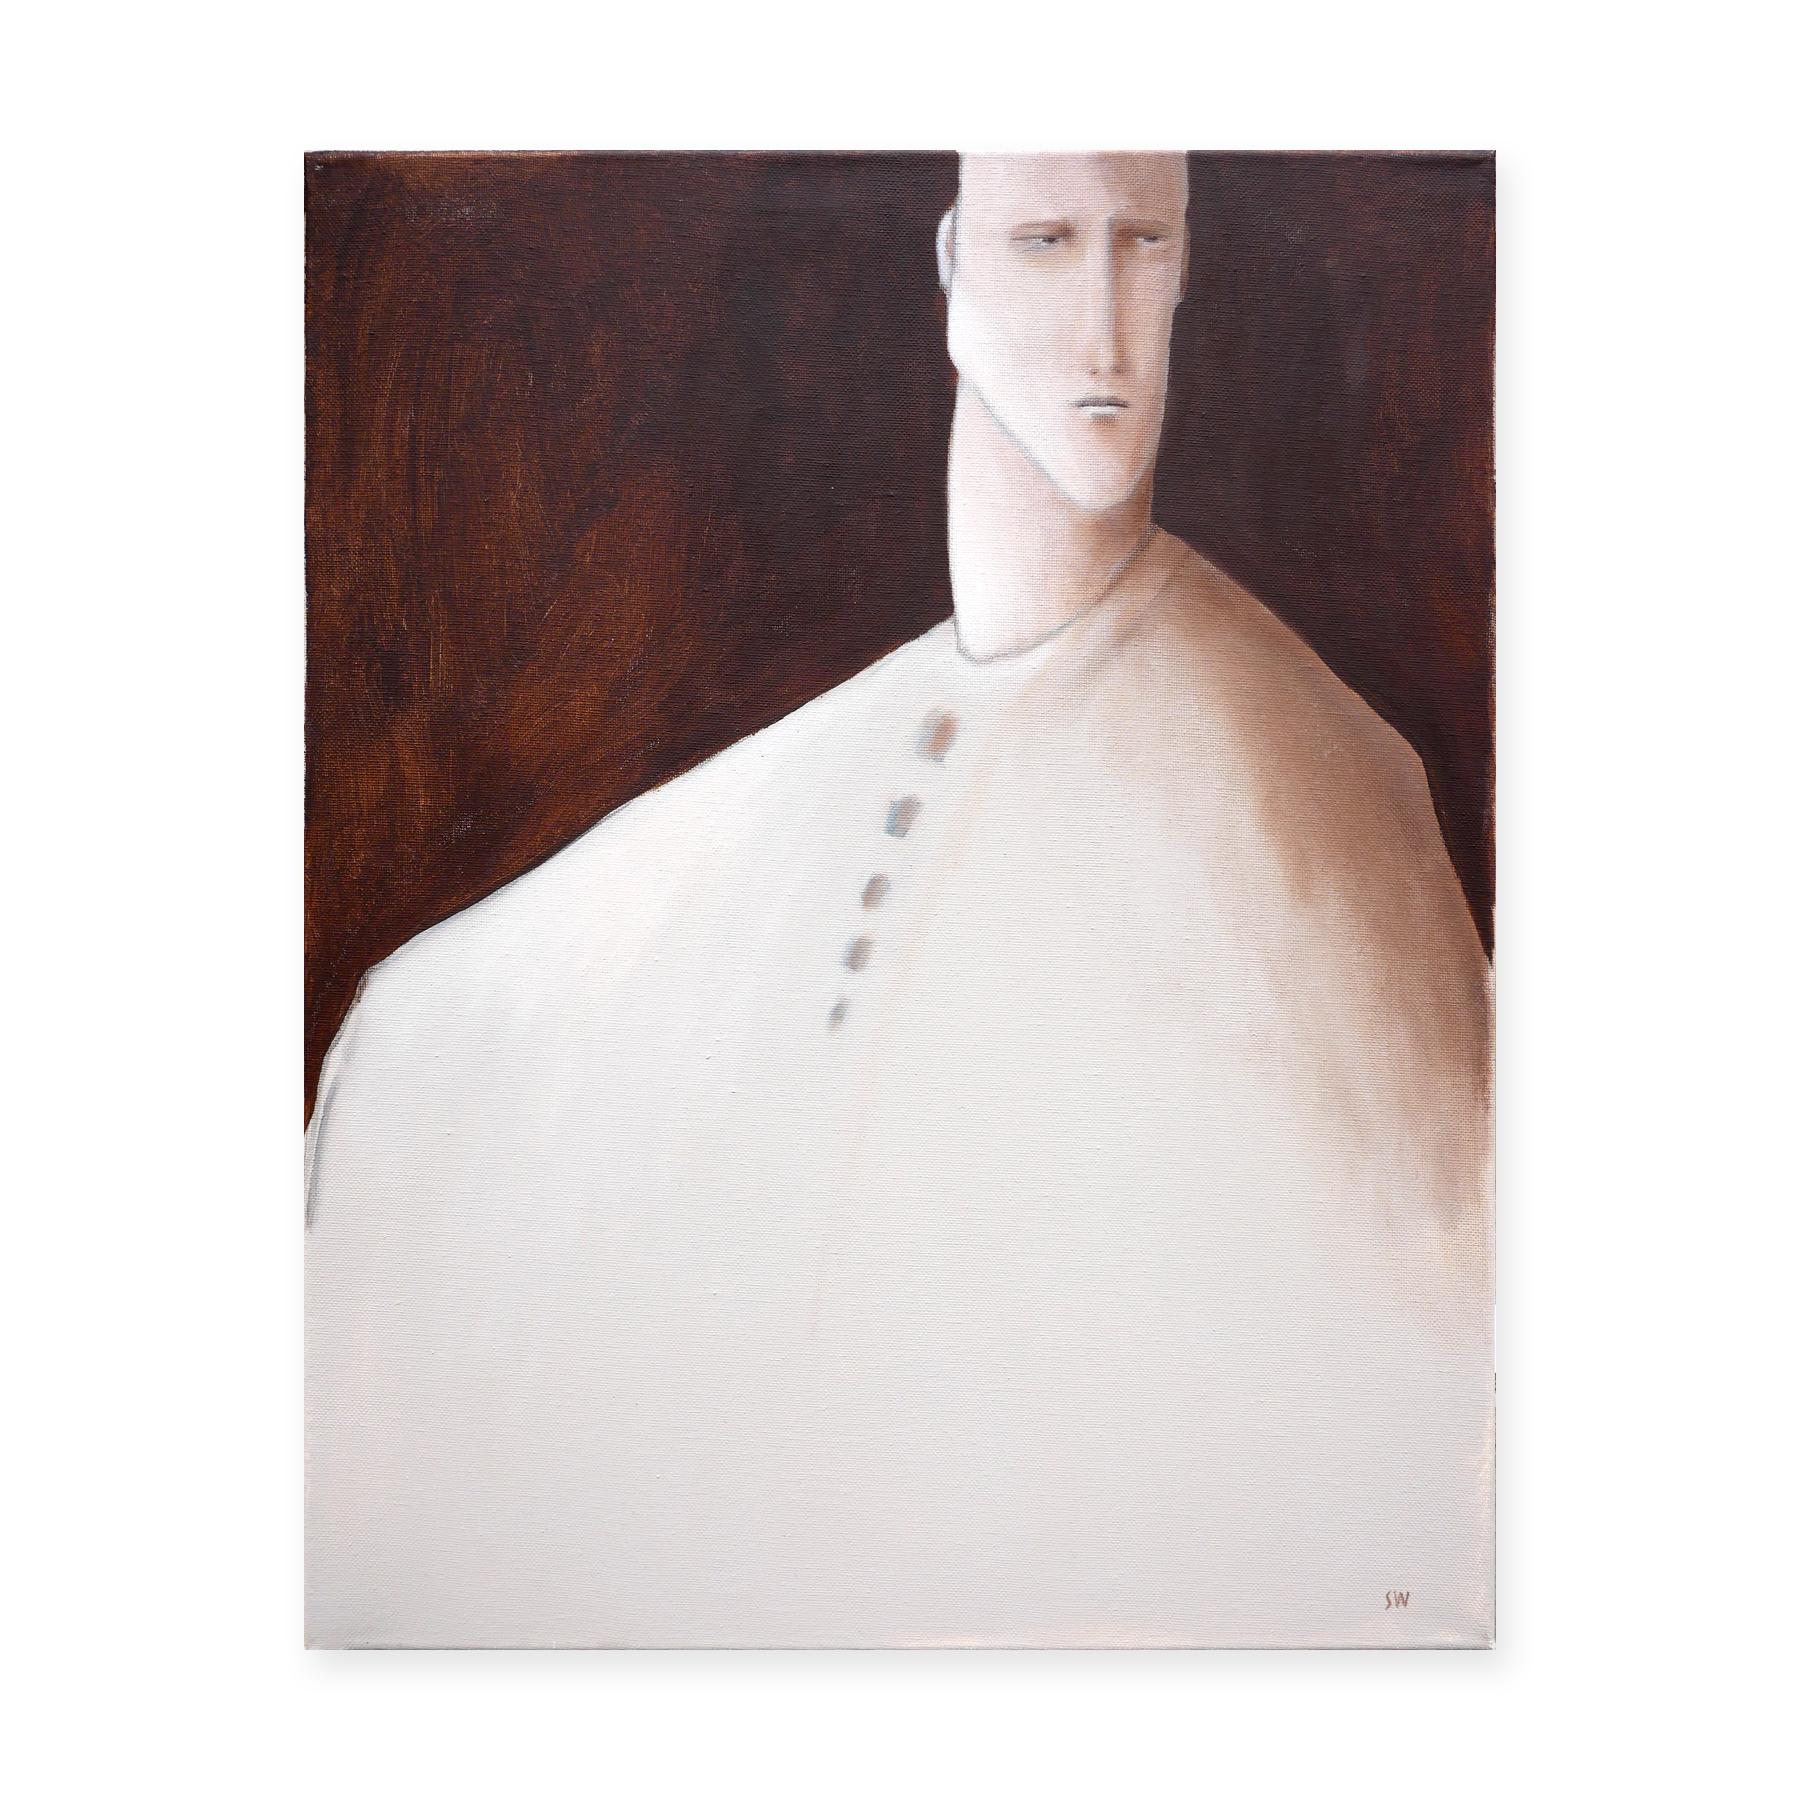 Brown-toned abstract figurative painting by Houston, TX artist Scott Woodard. The painting depicts a man in a white garment seated against a dark brown background. Signed by the artist at the bottom right and titled and dated at the back. Unframed